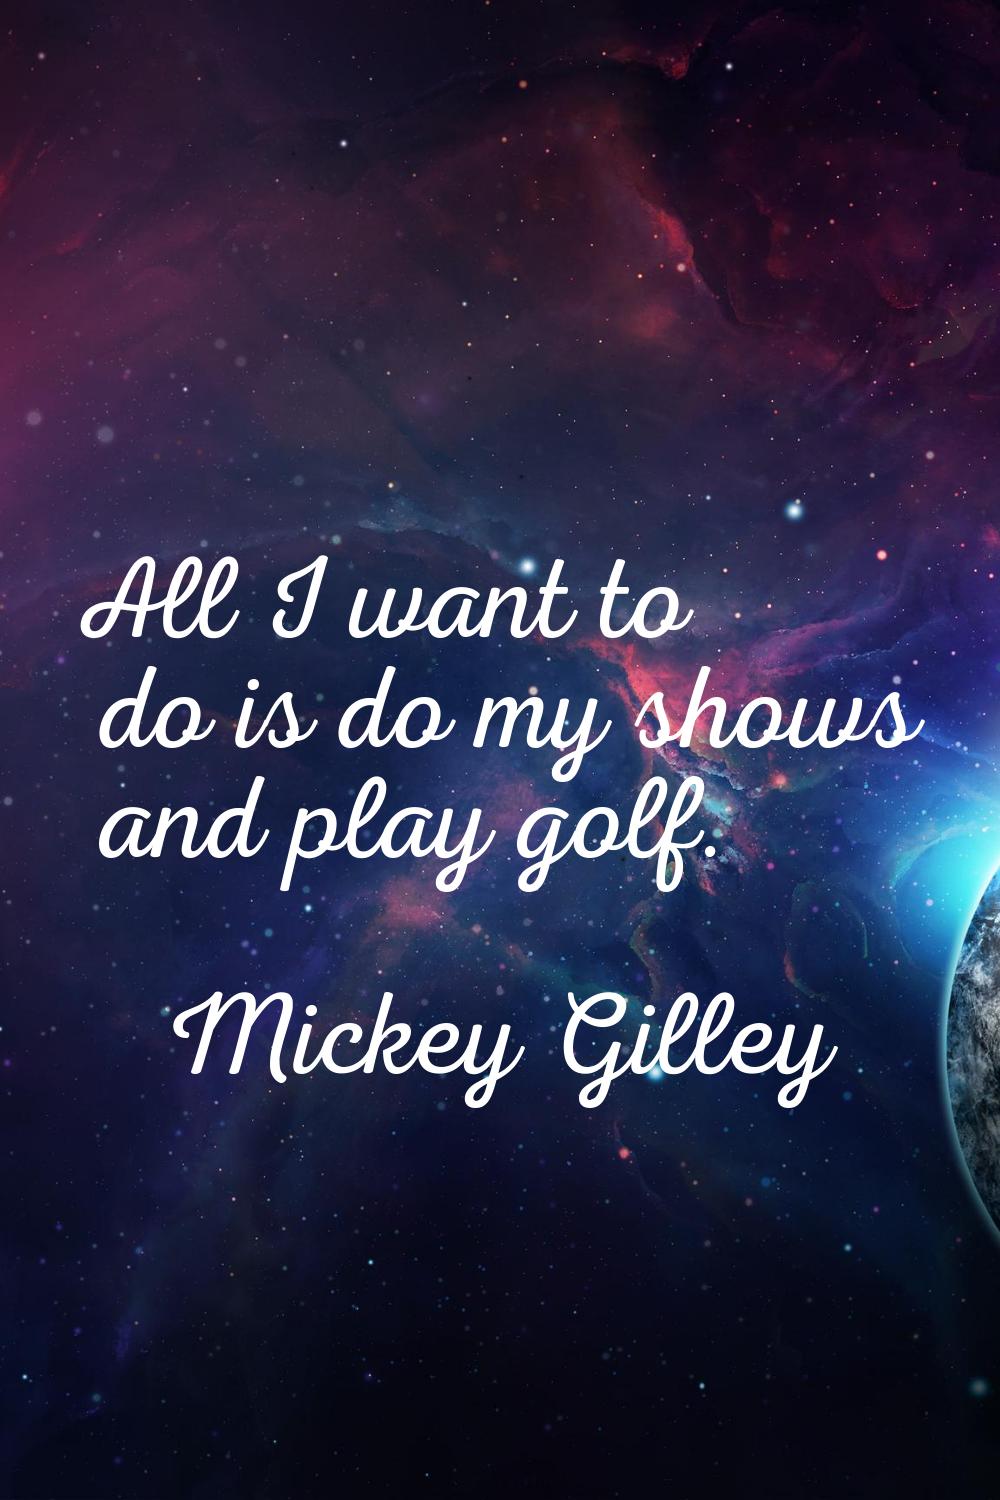 All I want to do is do my shows and play golf.